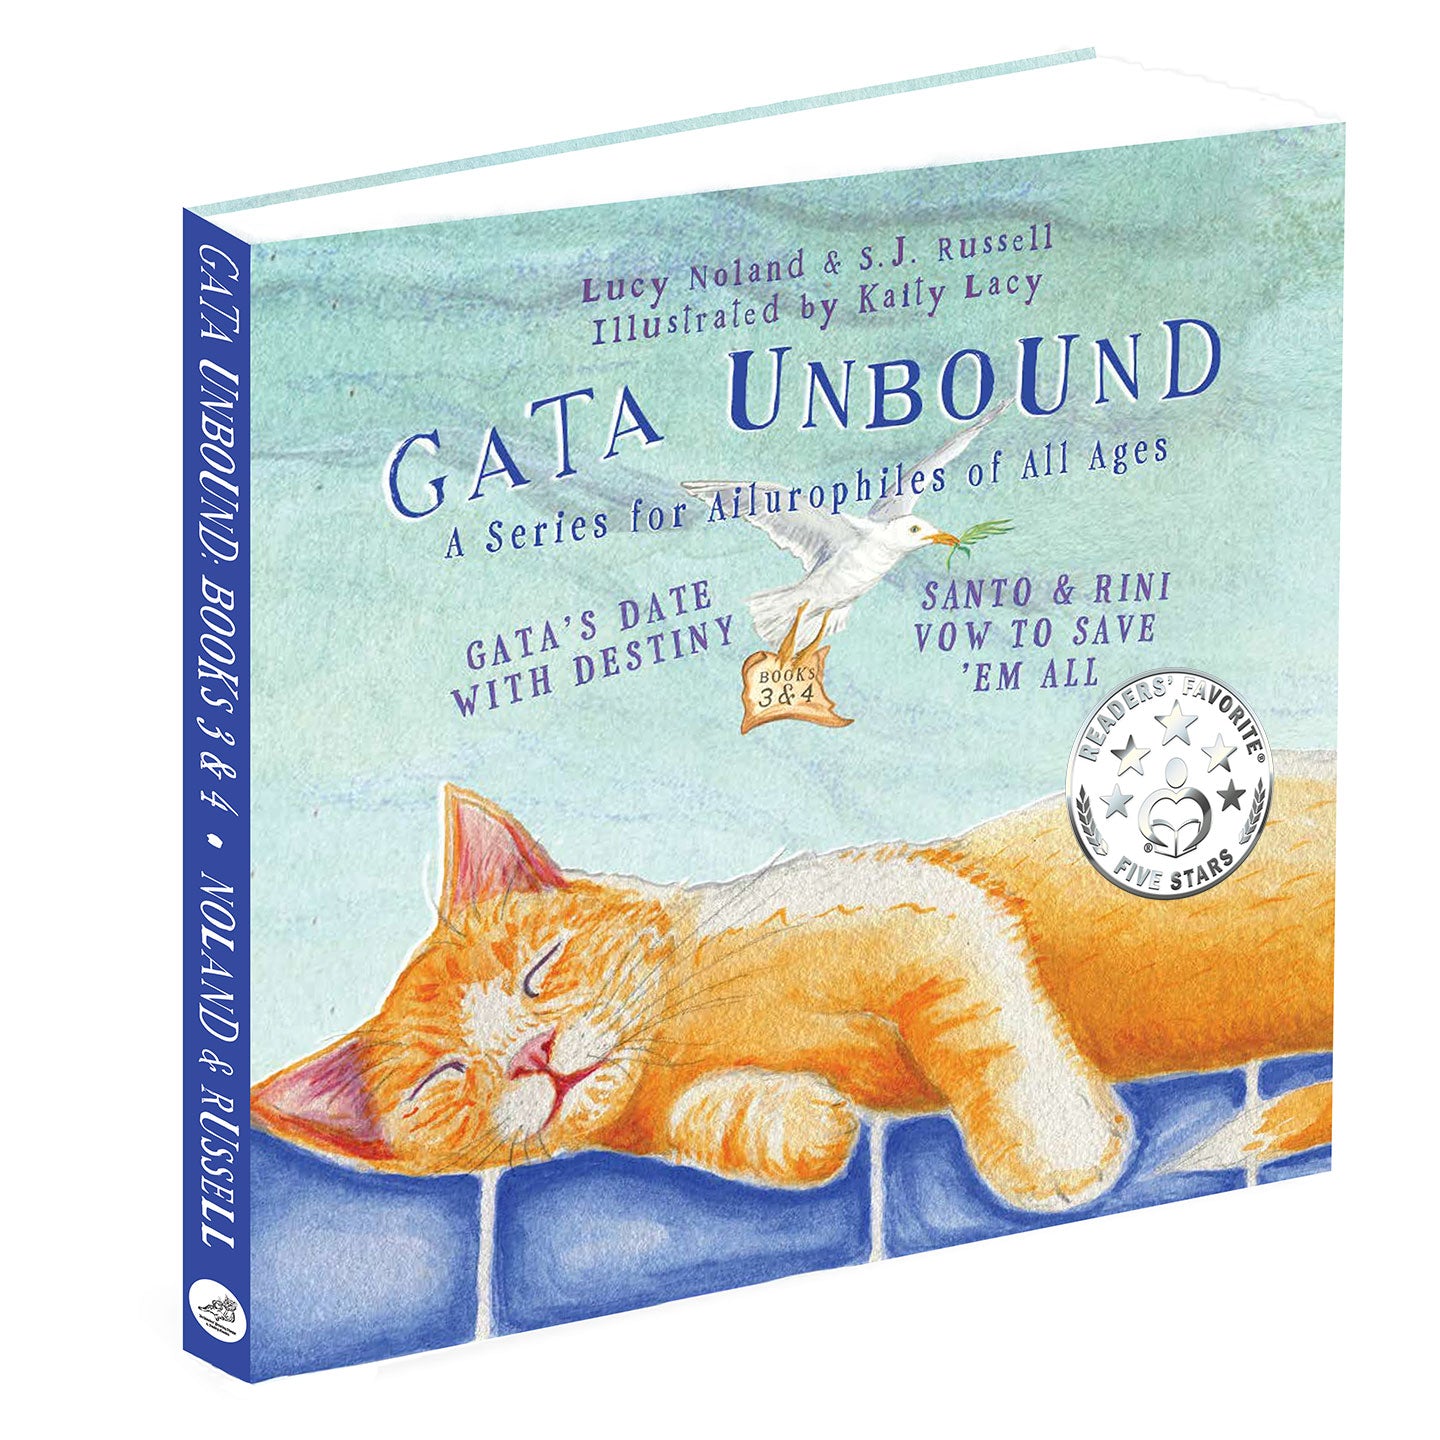 Gata Unbound: Gata's Date with Destiny and Santo & Rini Vow to Save 'em All